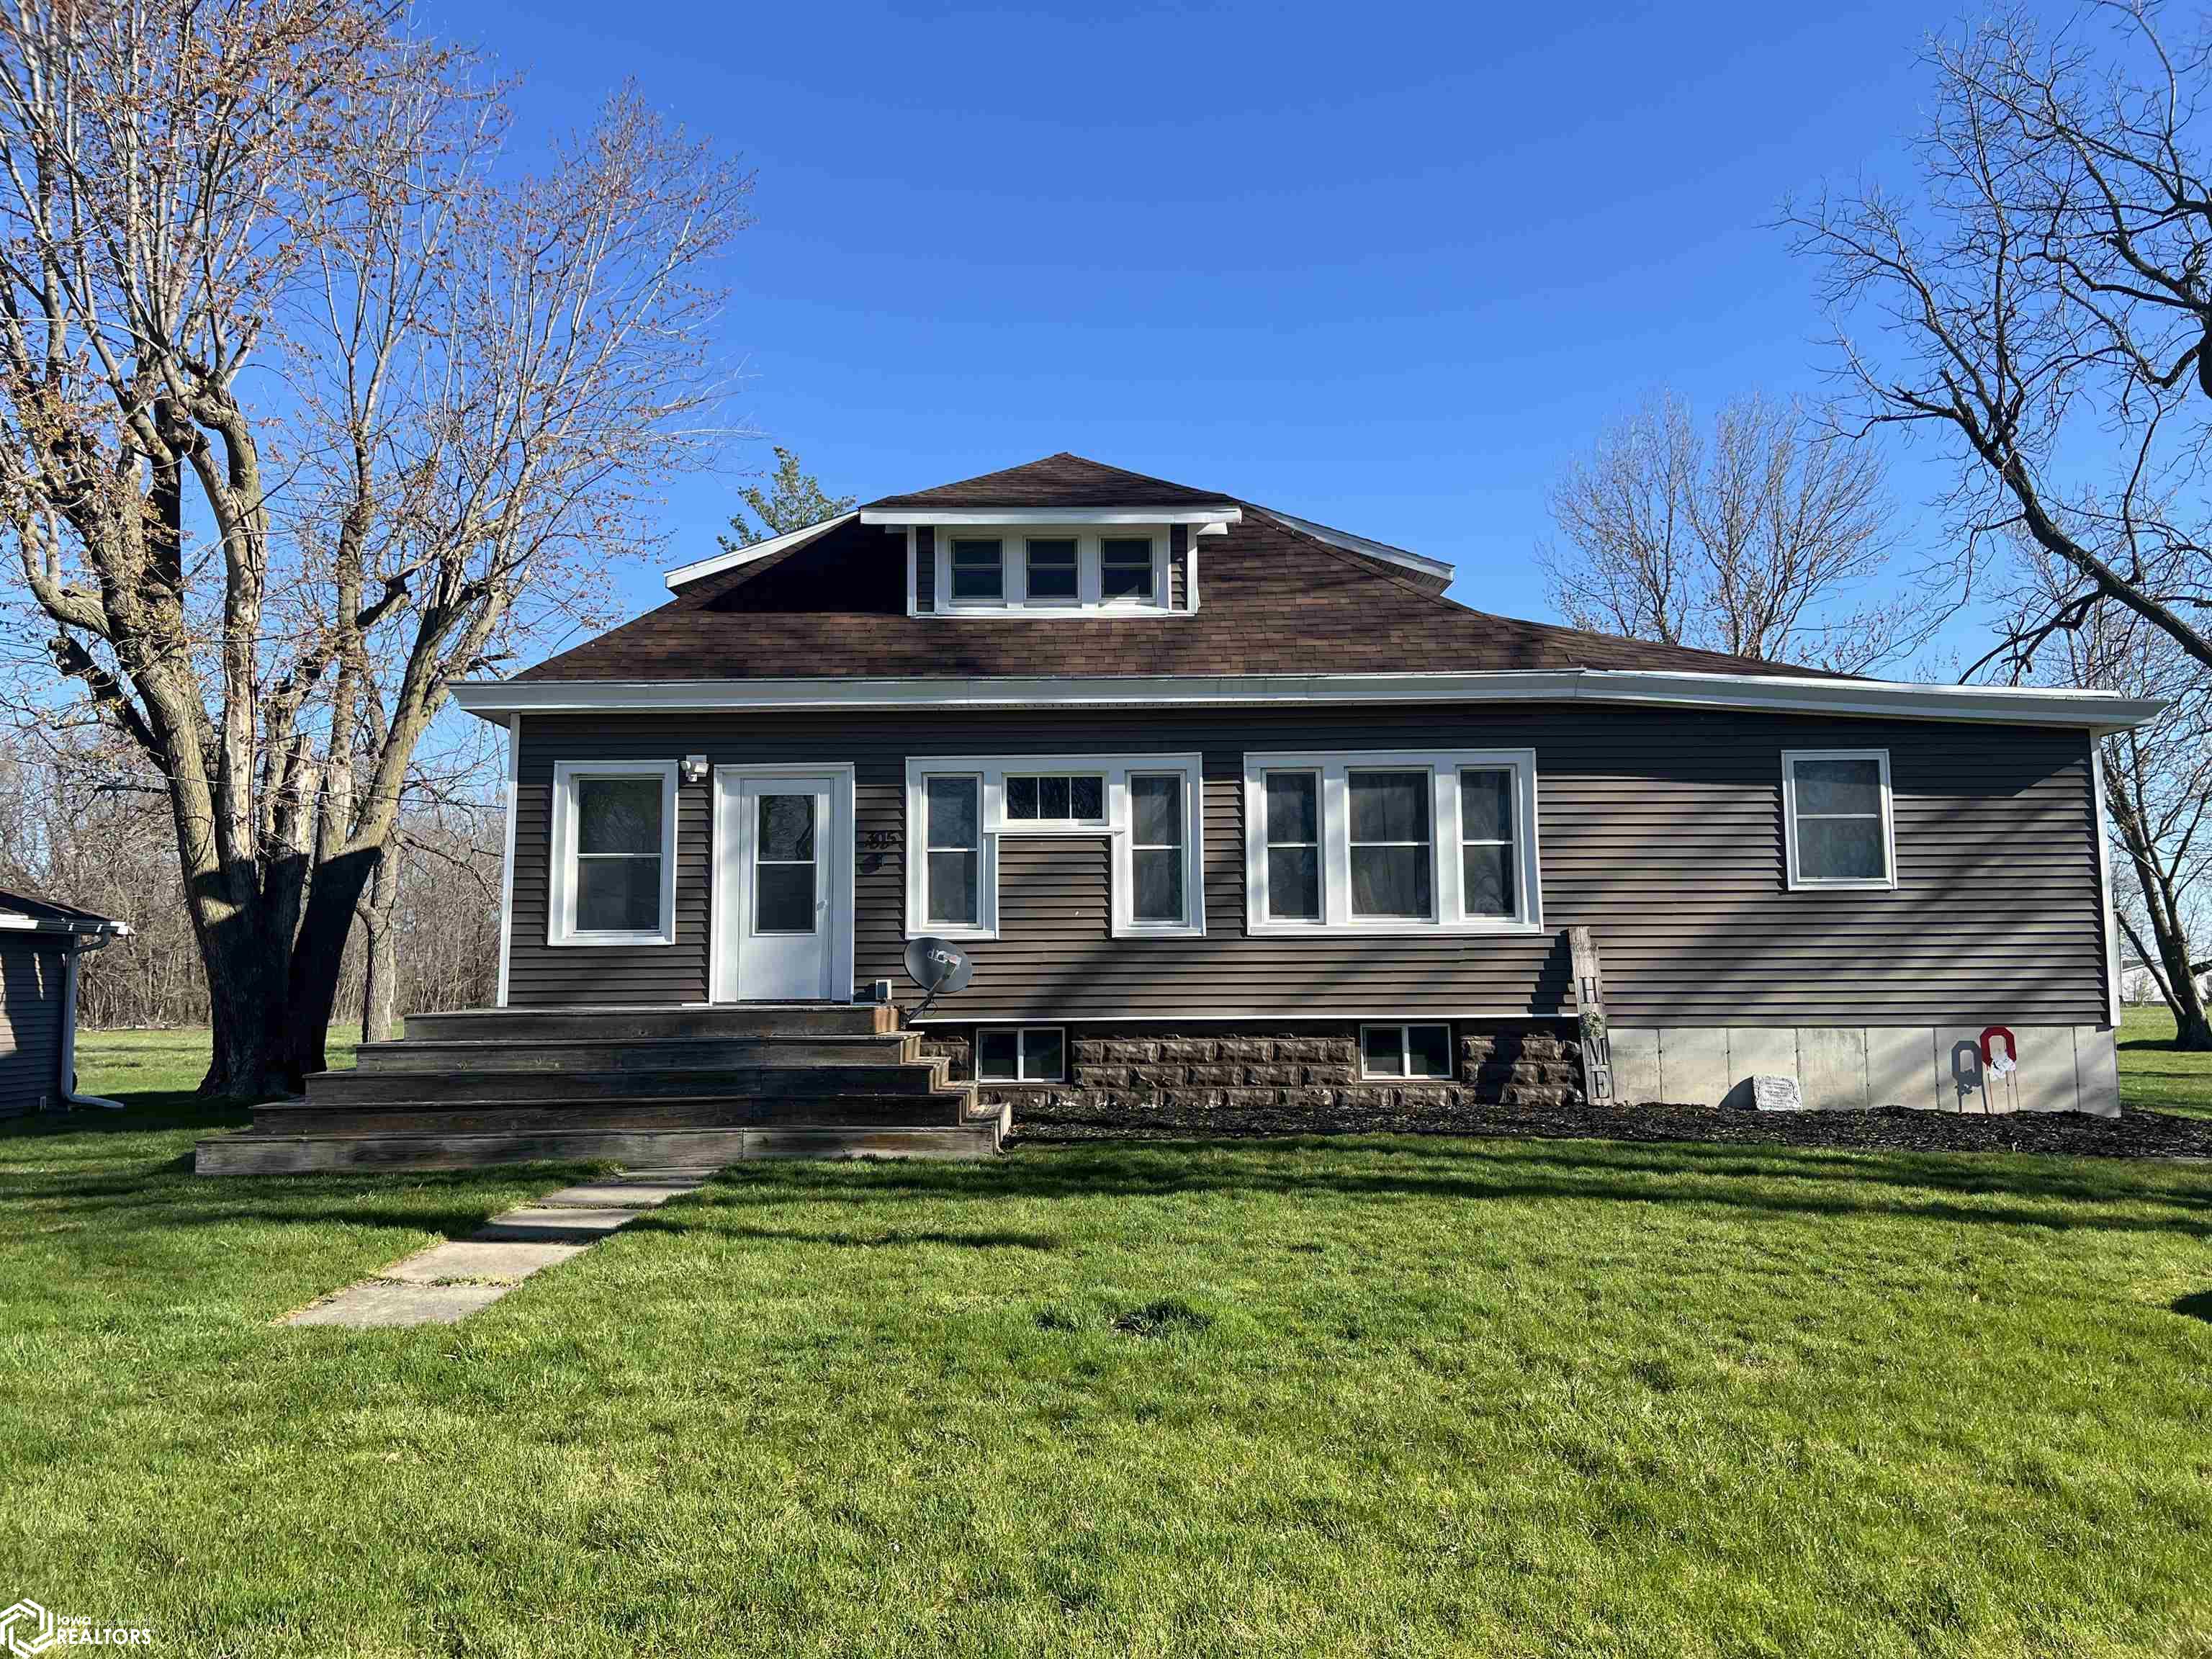 305 E Hickory, Blakesburg, Iowa 52536, 2 Bedrooms Bedrooms, ,2 BathroomsBathrooms,Single Family,For Sale,E Hickory,6316076